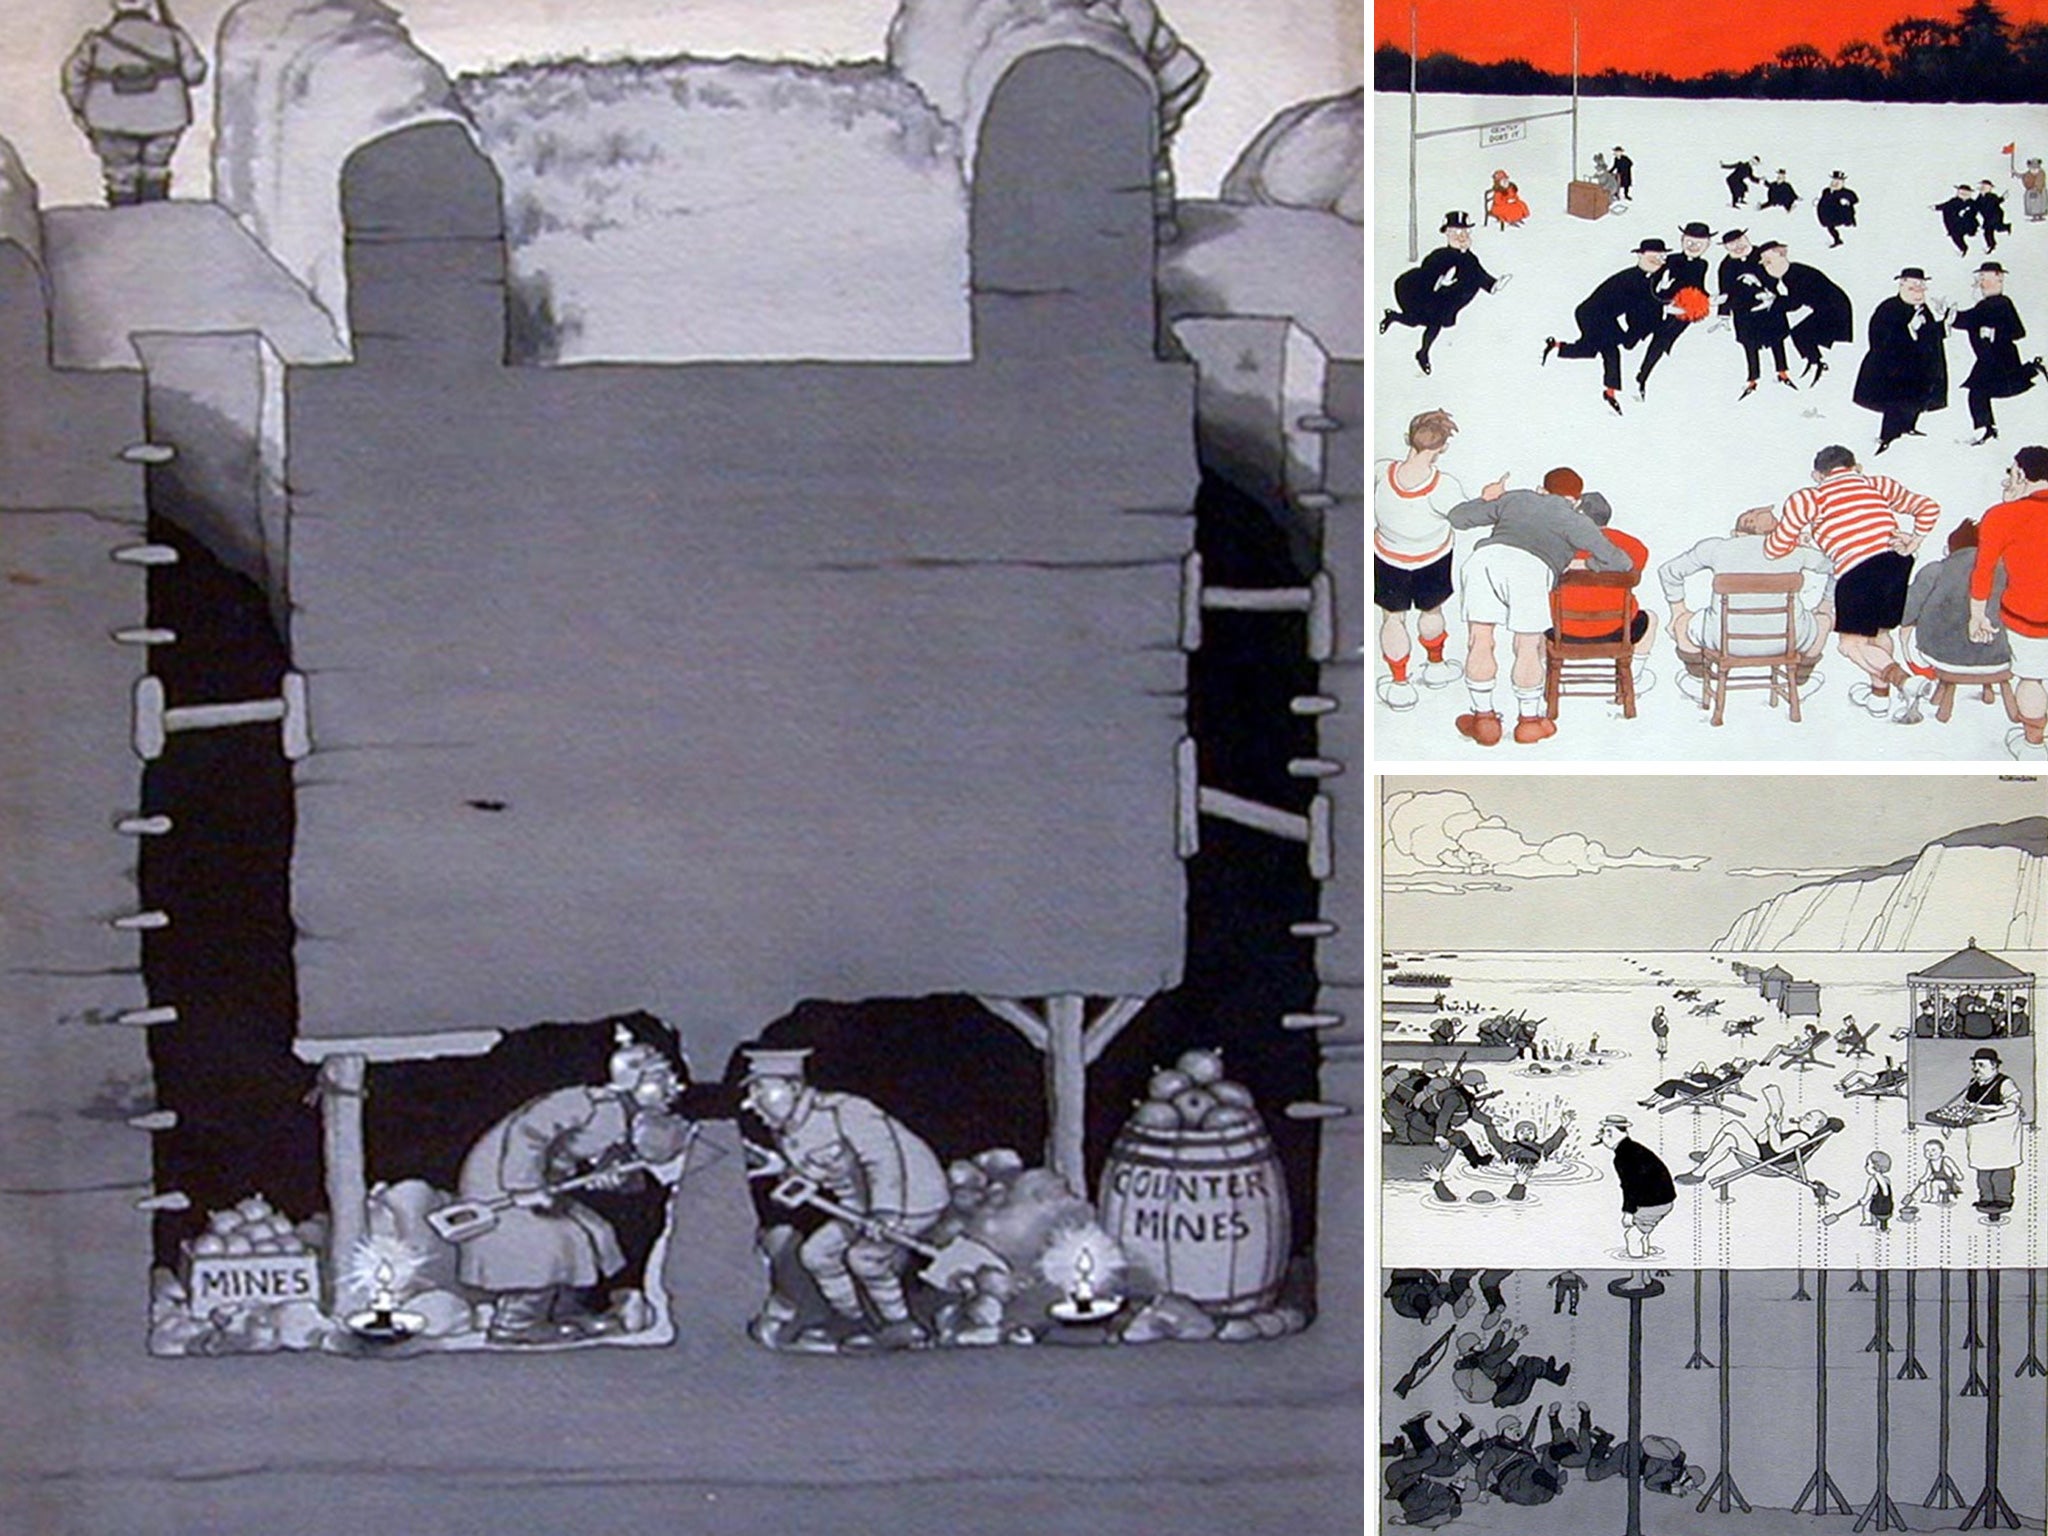 Many of Heath Robinson’s best-known works are in the collection, which was put up for sale after the death of its owner